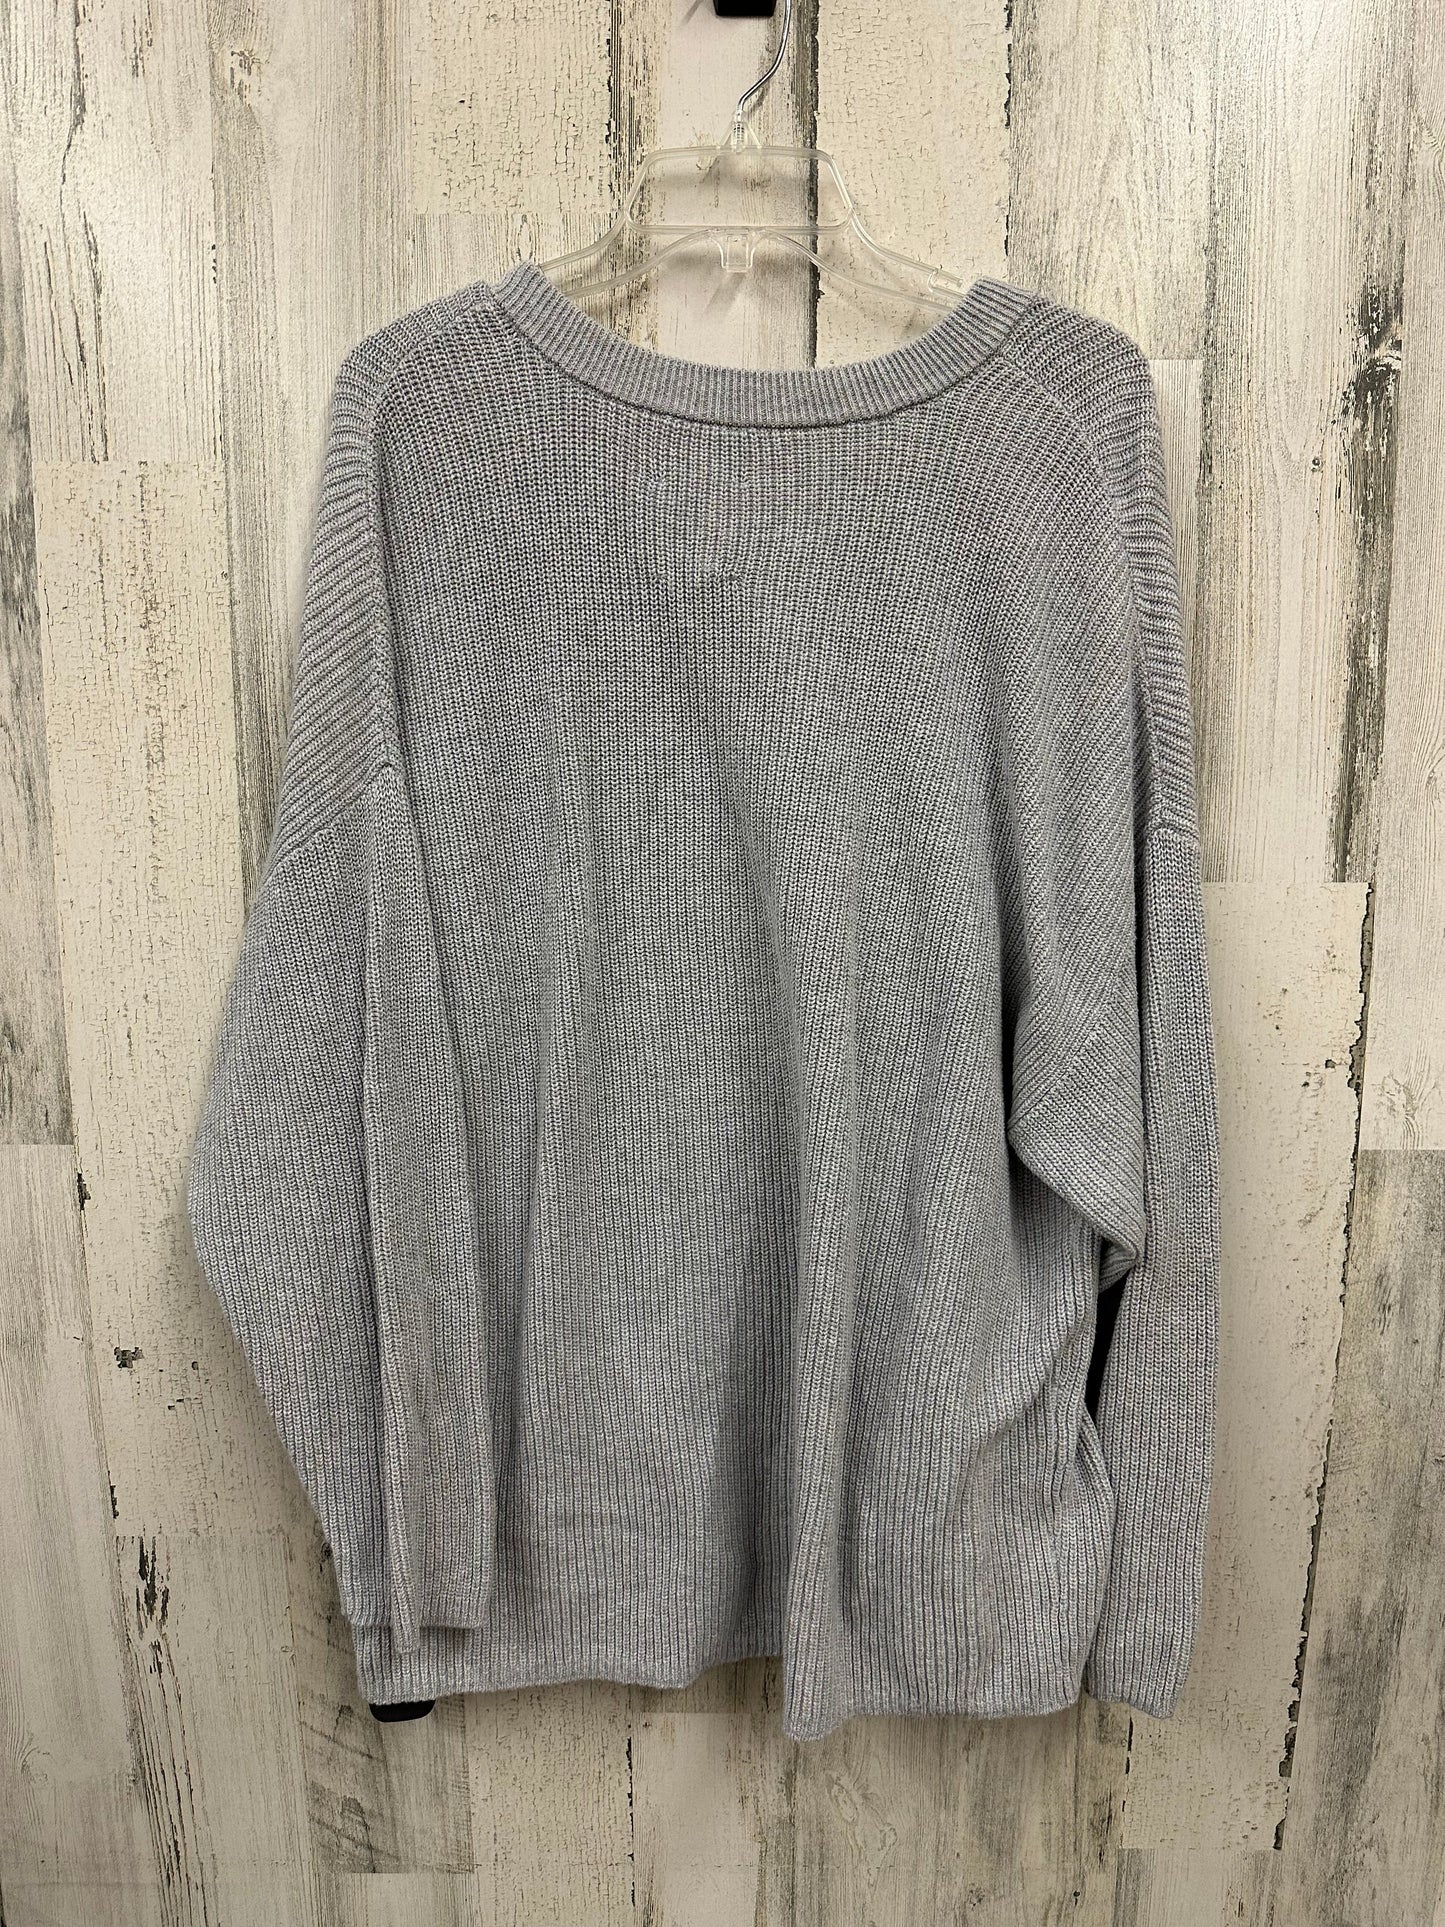 Sweater By Aerie  Size: Xl